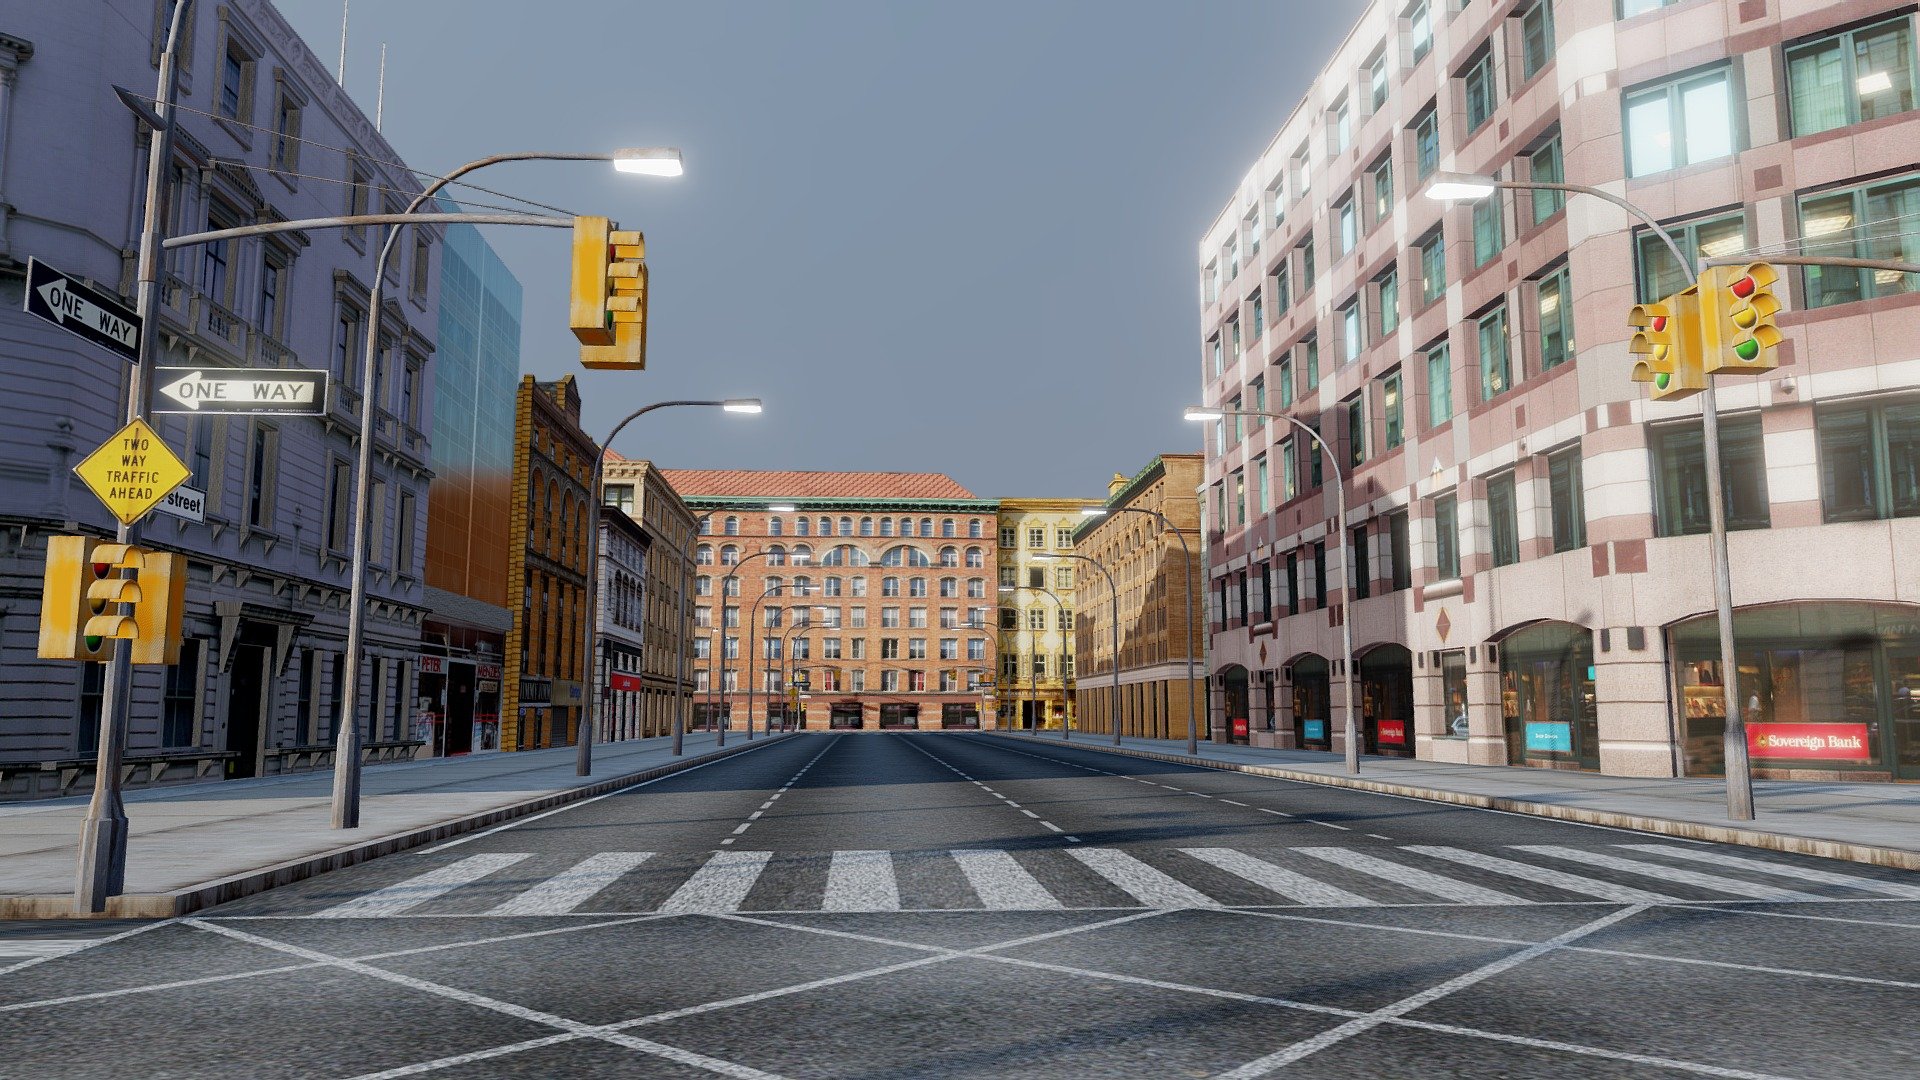 This city was made using mainly photographic data.
The model is made up of 1 very detailed tilable block for easy expansion, detailed road network, billboards, and street furniture.
The building texture sizes vary

This model can be used for interactive purposes (eg. game environments, Vr walkthroughs etc.) - Low Poly Street Scene - Buy Royalty Free 3D model by Giimann 3d model